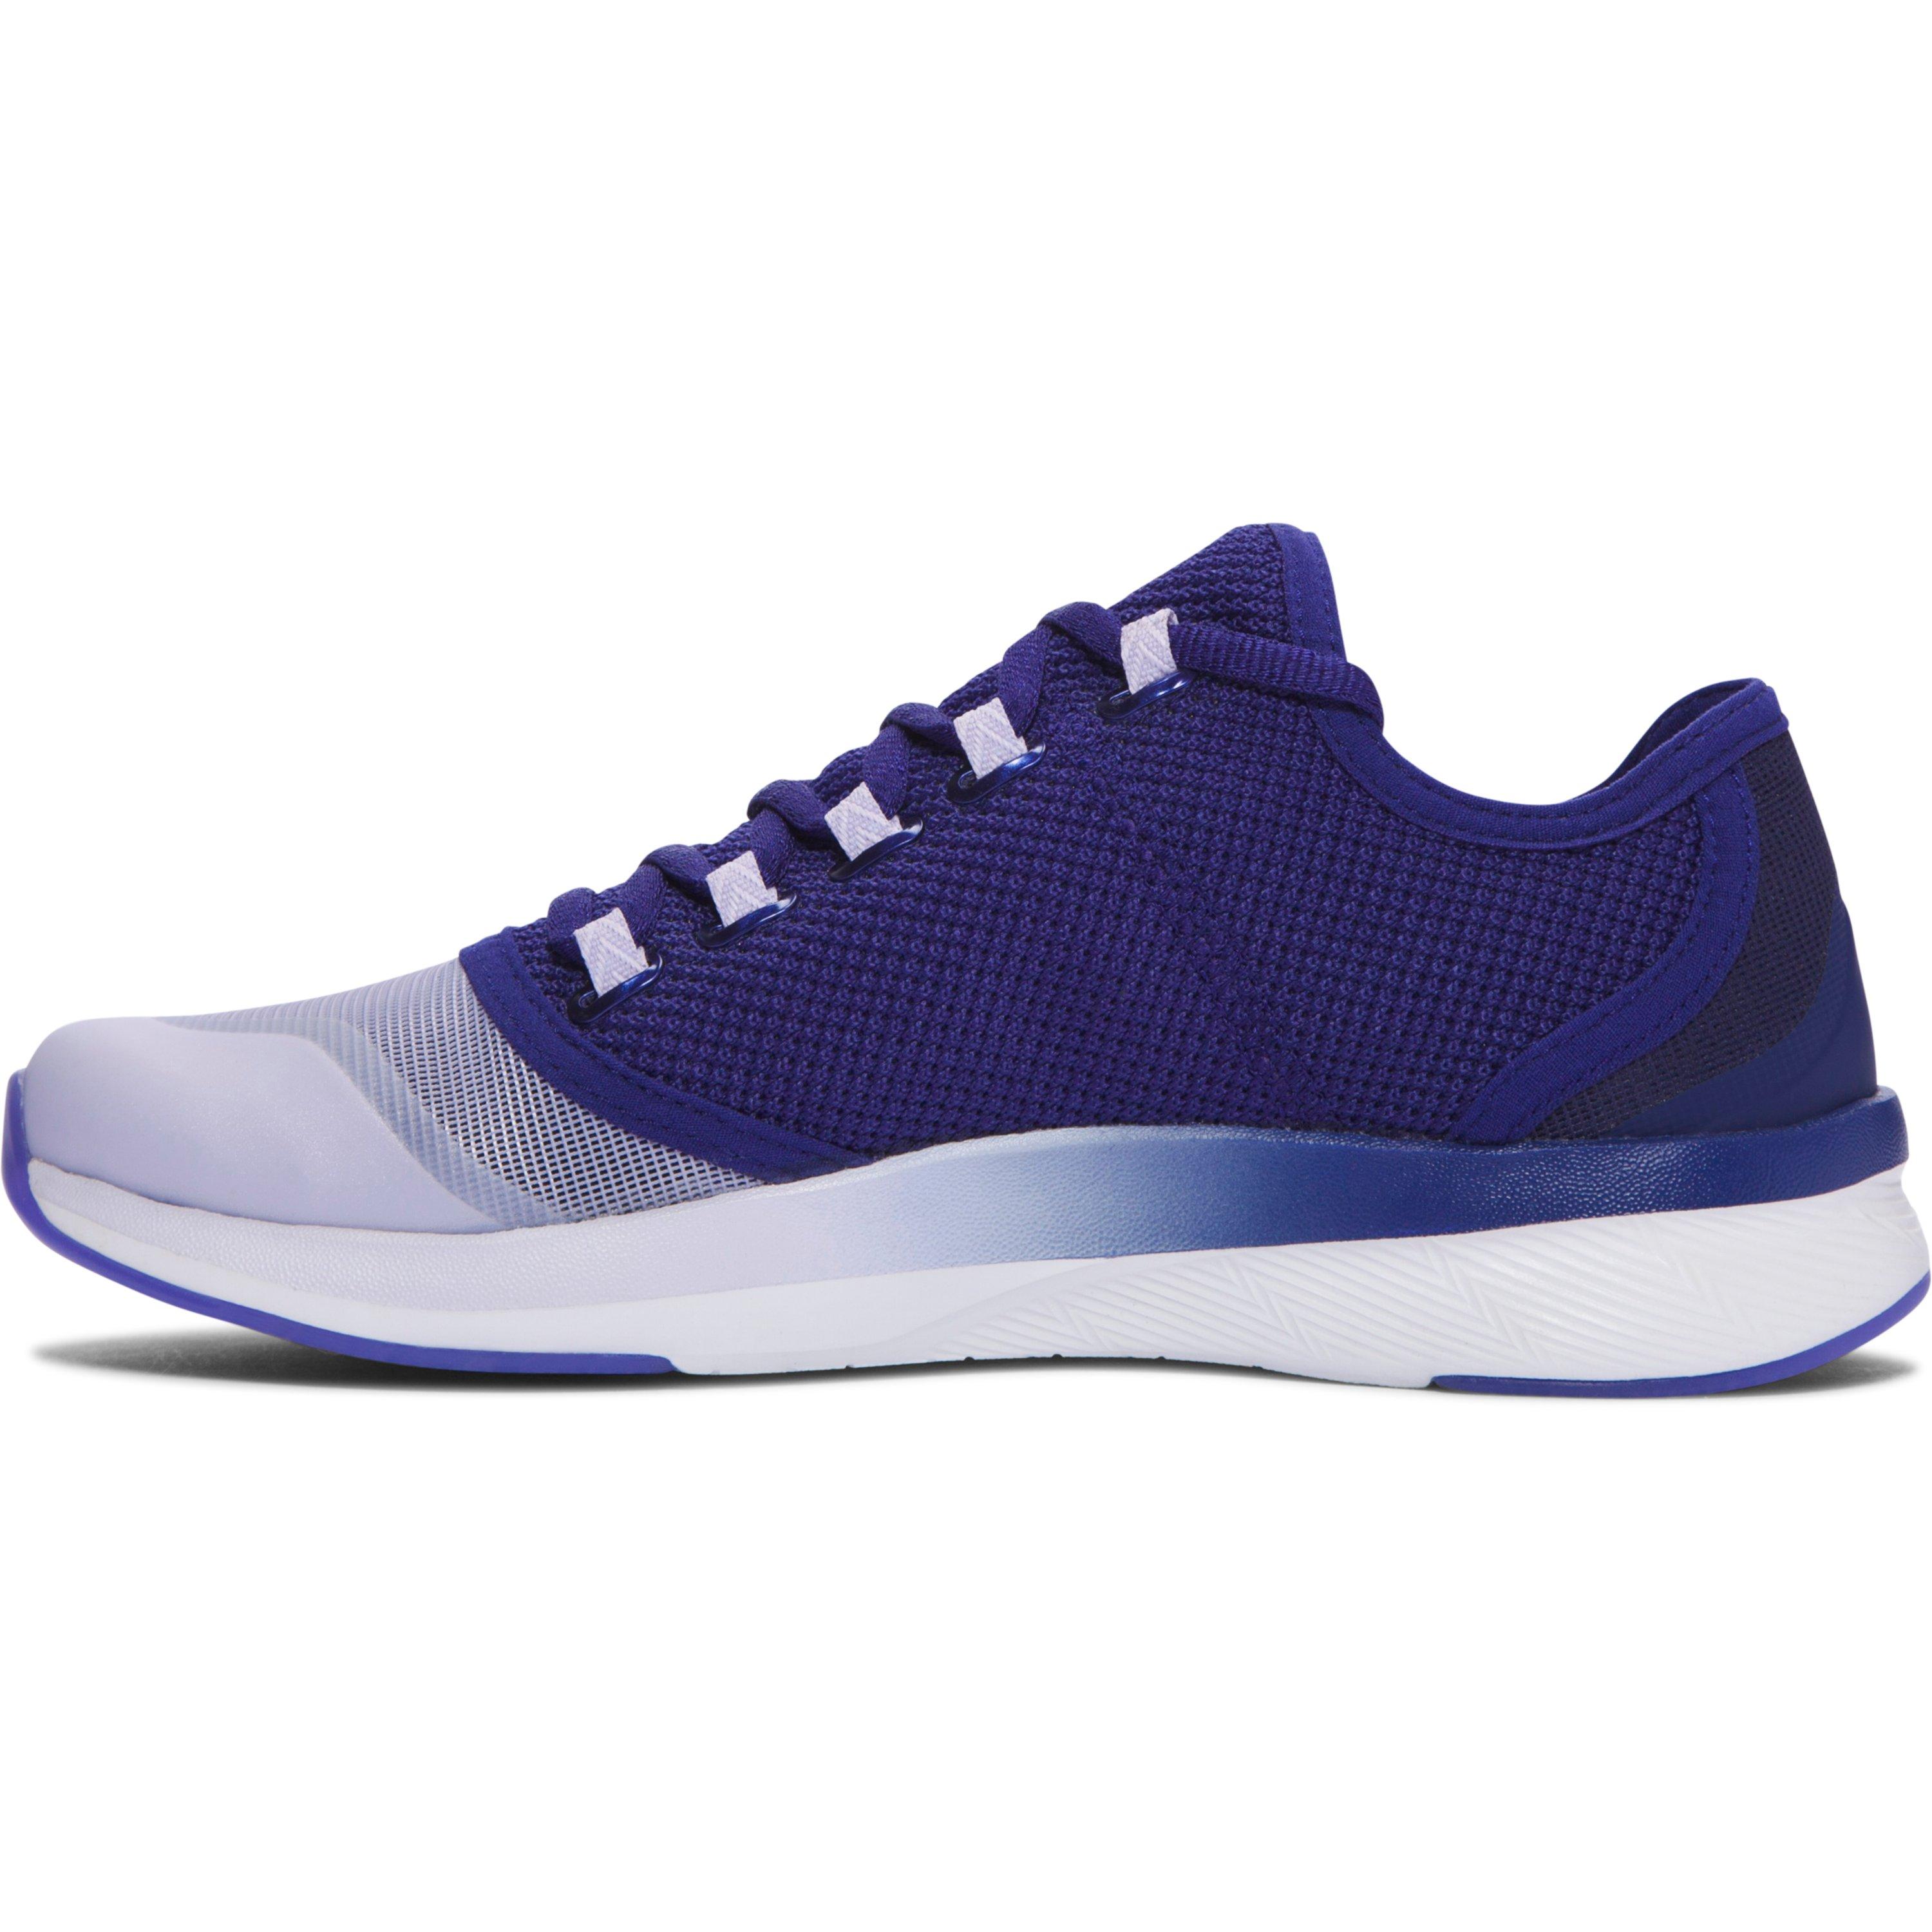 Lyst - Under Armour Women's Ua Charged Push Training Shoes in Purple